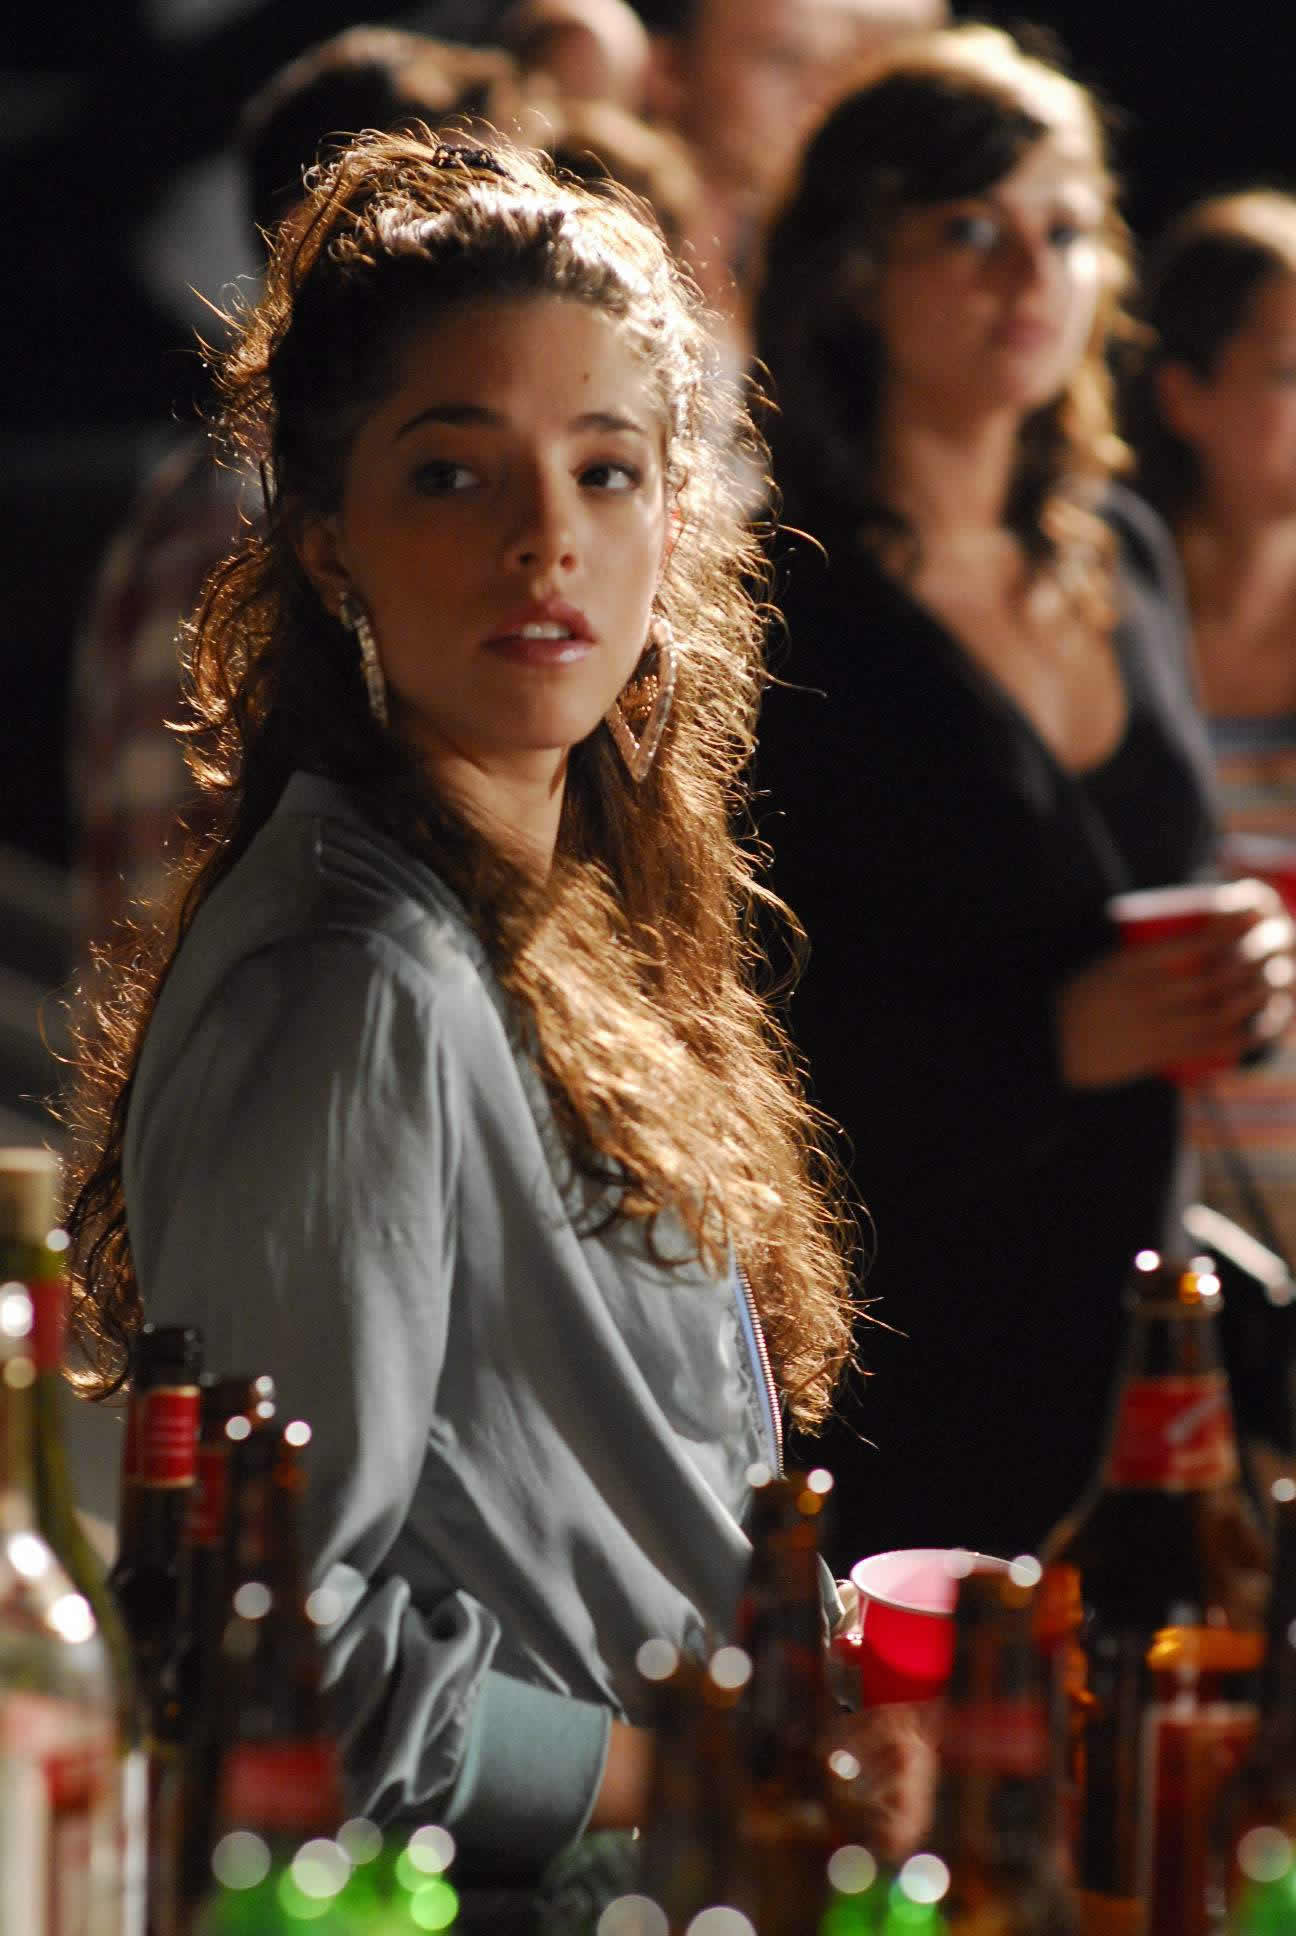 Olivia Thirlby as Stephanie in Sony Pictures Classics' The Wackness (2008)